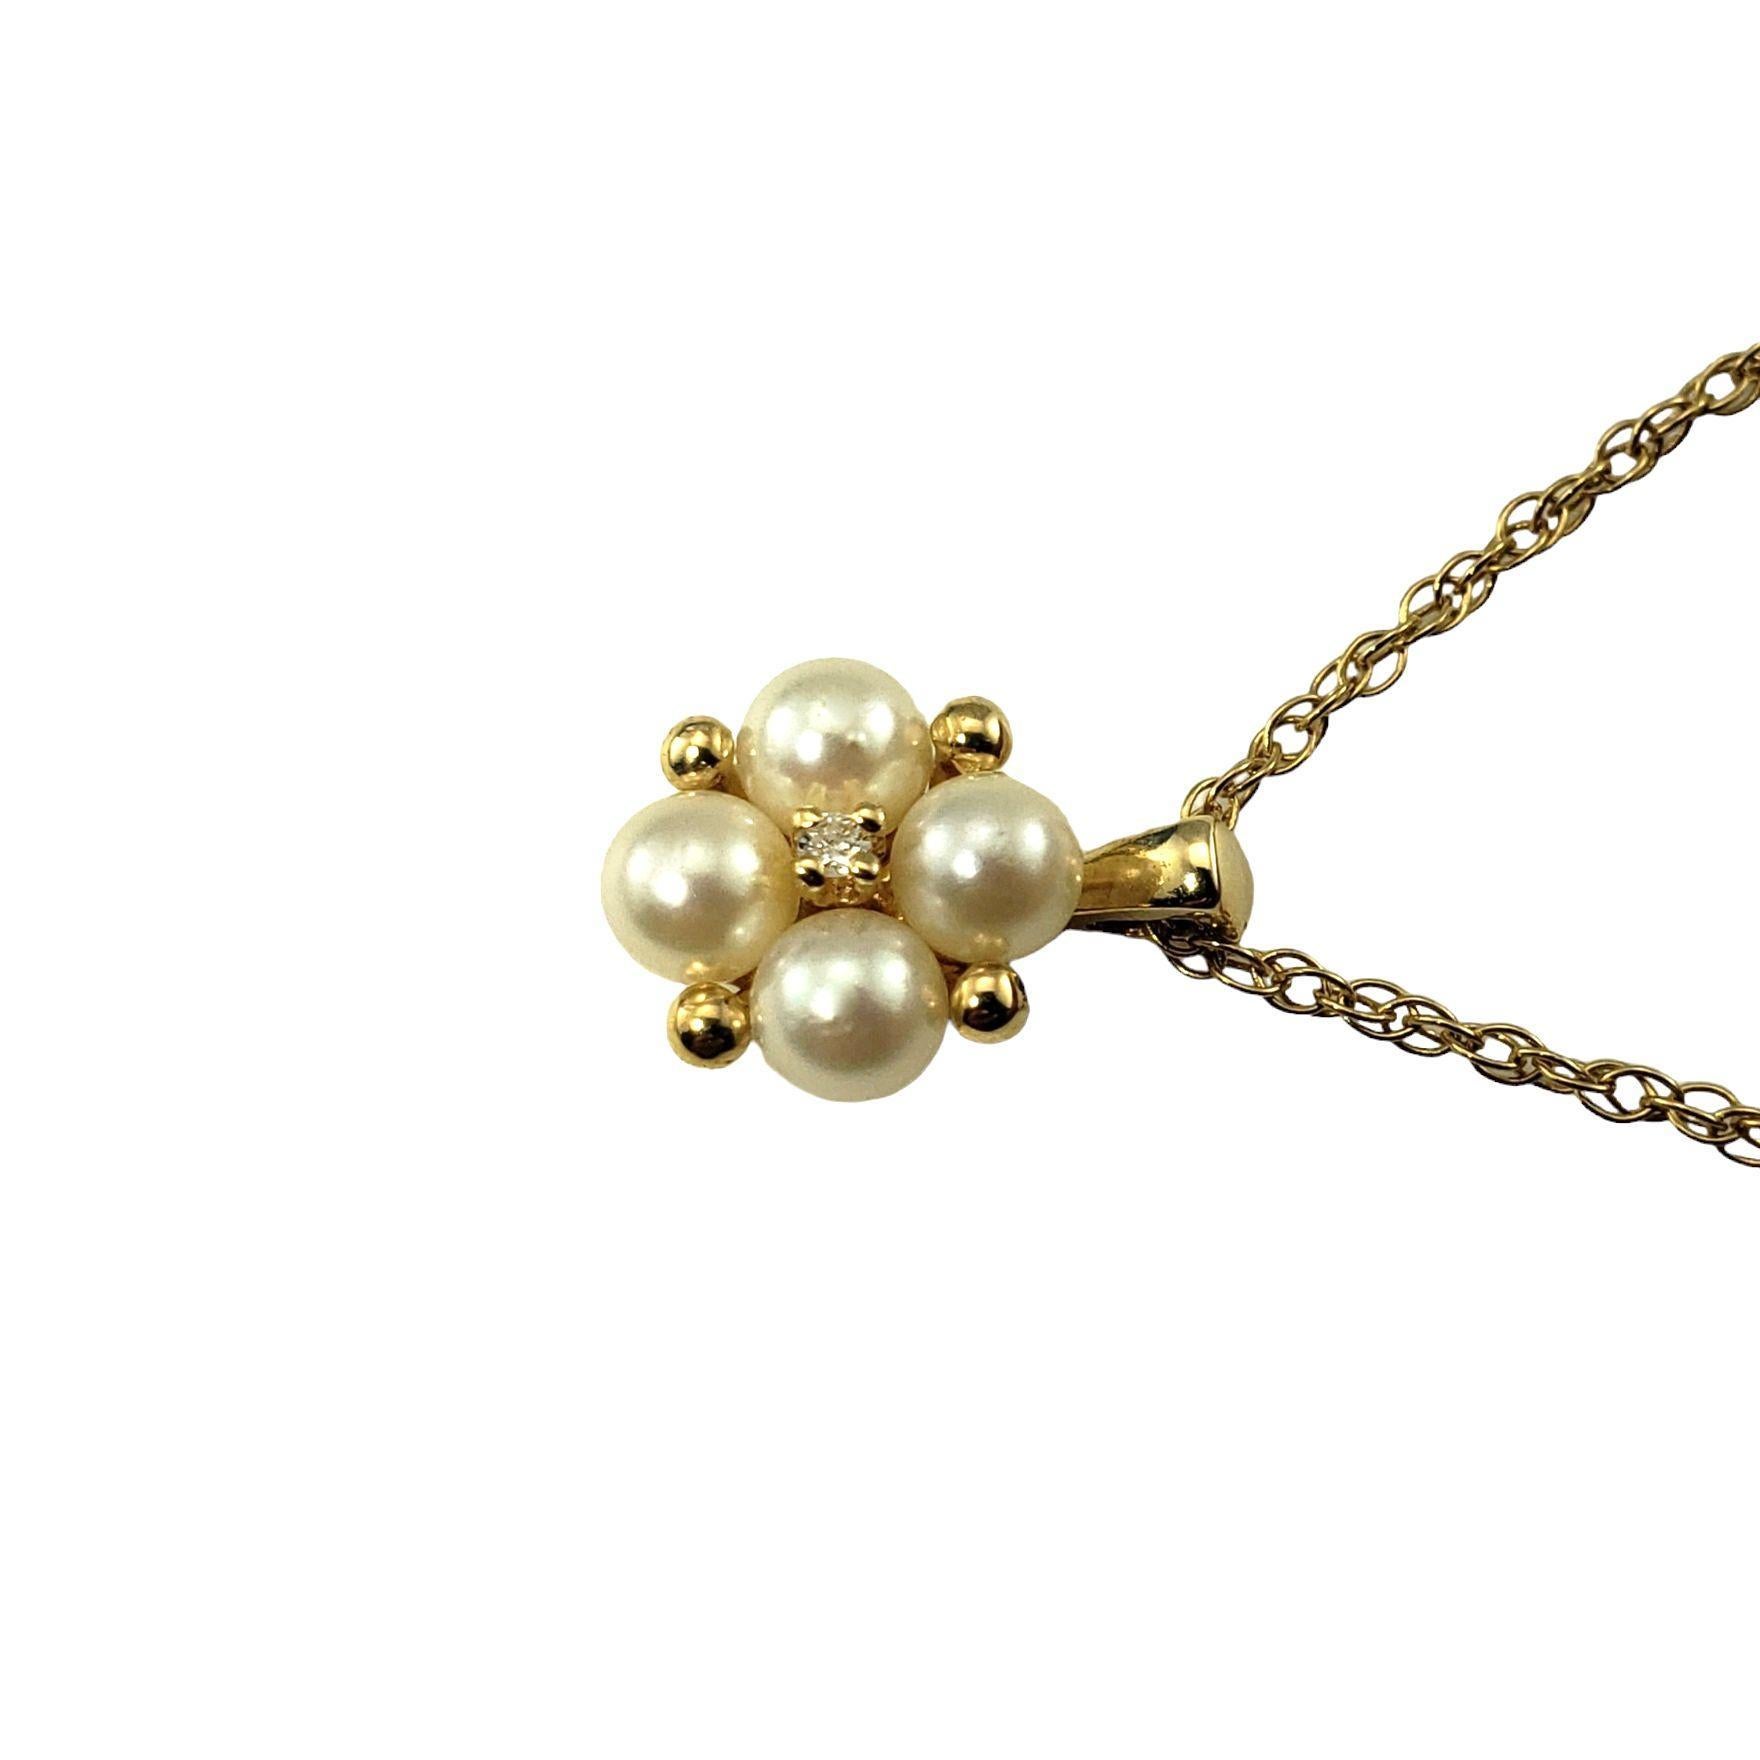 14 Karat Yellow Gold Pearl and Diamond Pendant Necklace-

This elegant pendant necklace features four round white pearls (4 mm each) and one round brilliant cut diamond set in classic 14K yellow gold.

Approximate total diamond weight: .01